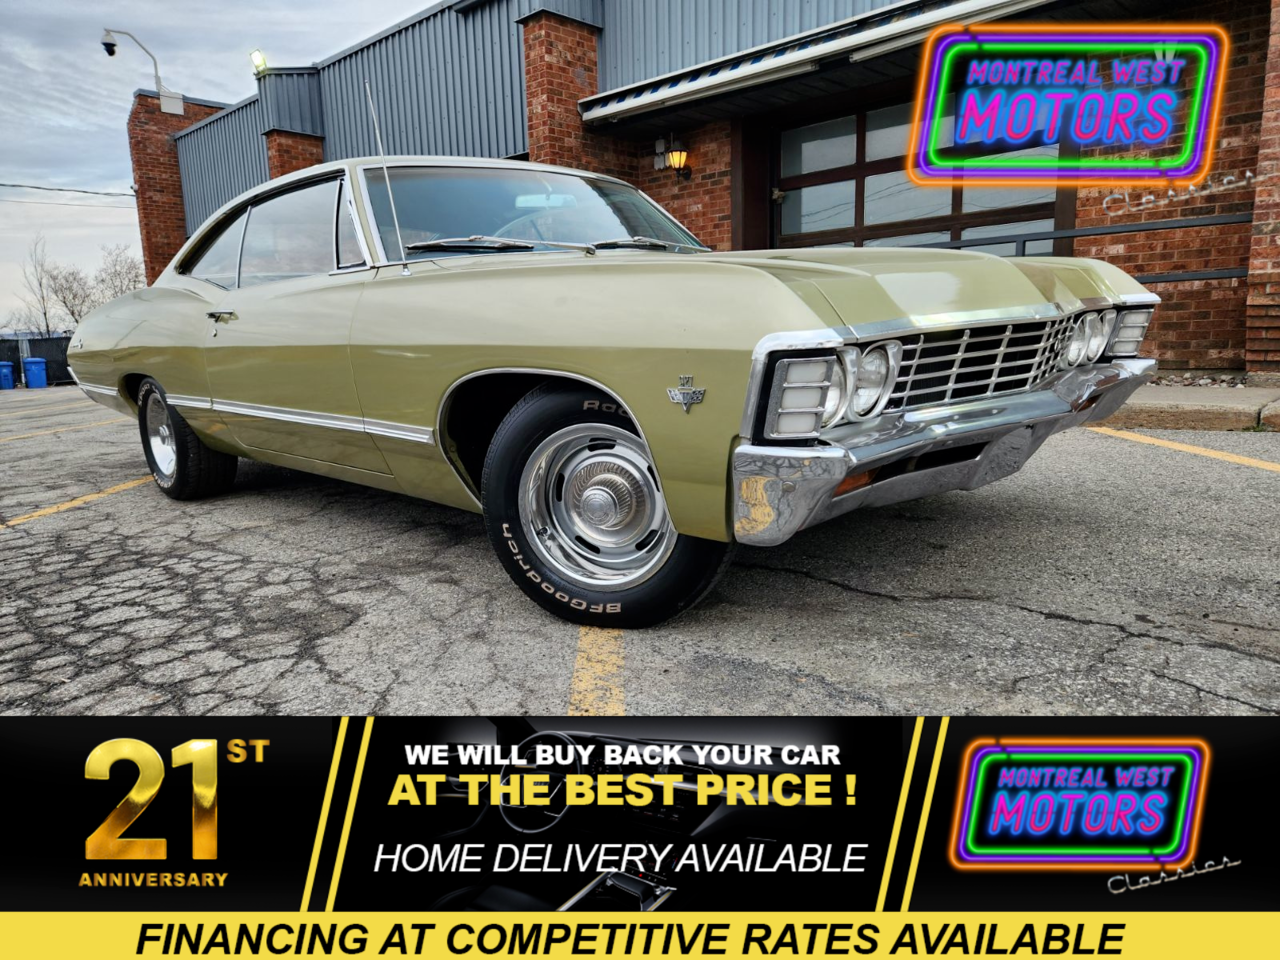 1967 Chevrolet Impala Garage kept all its life ! All steel body 79317 or